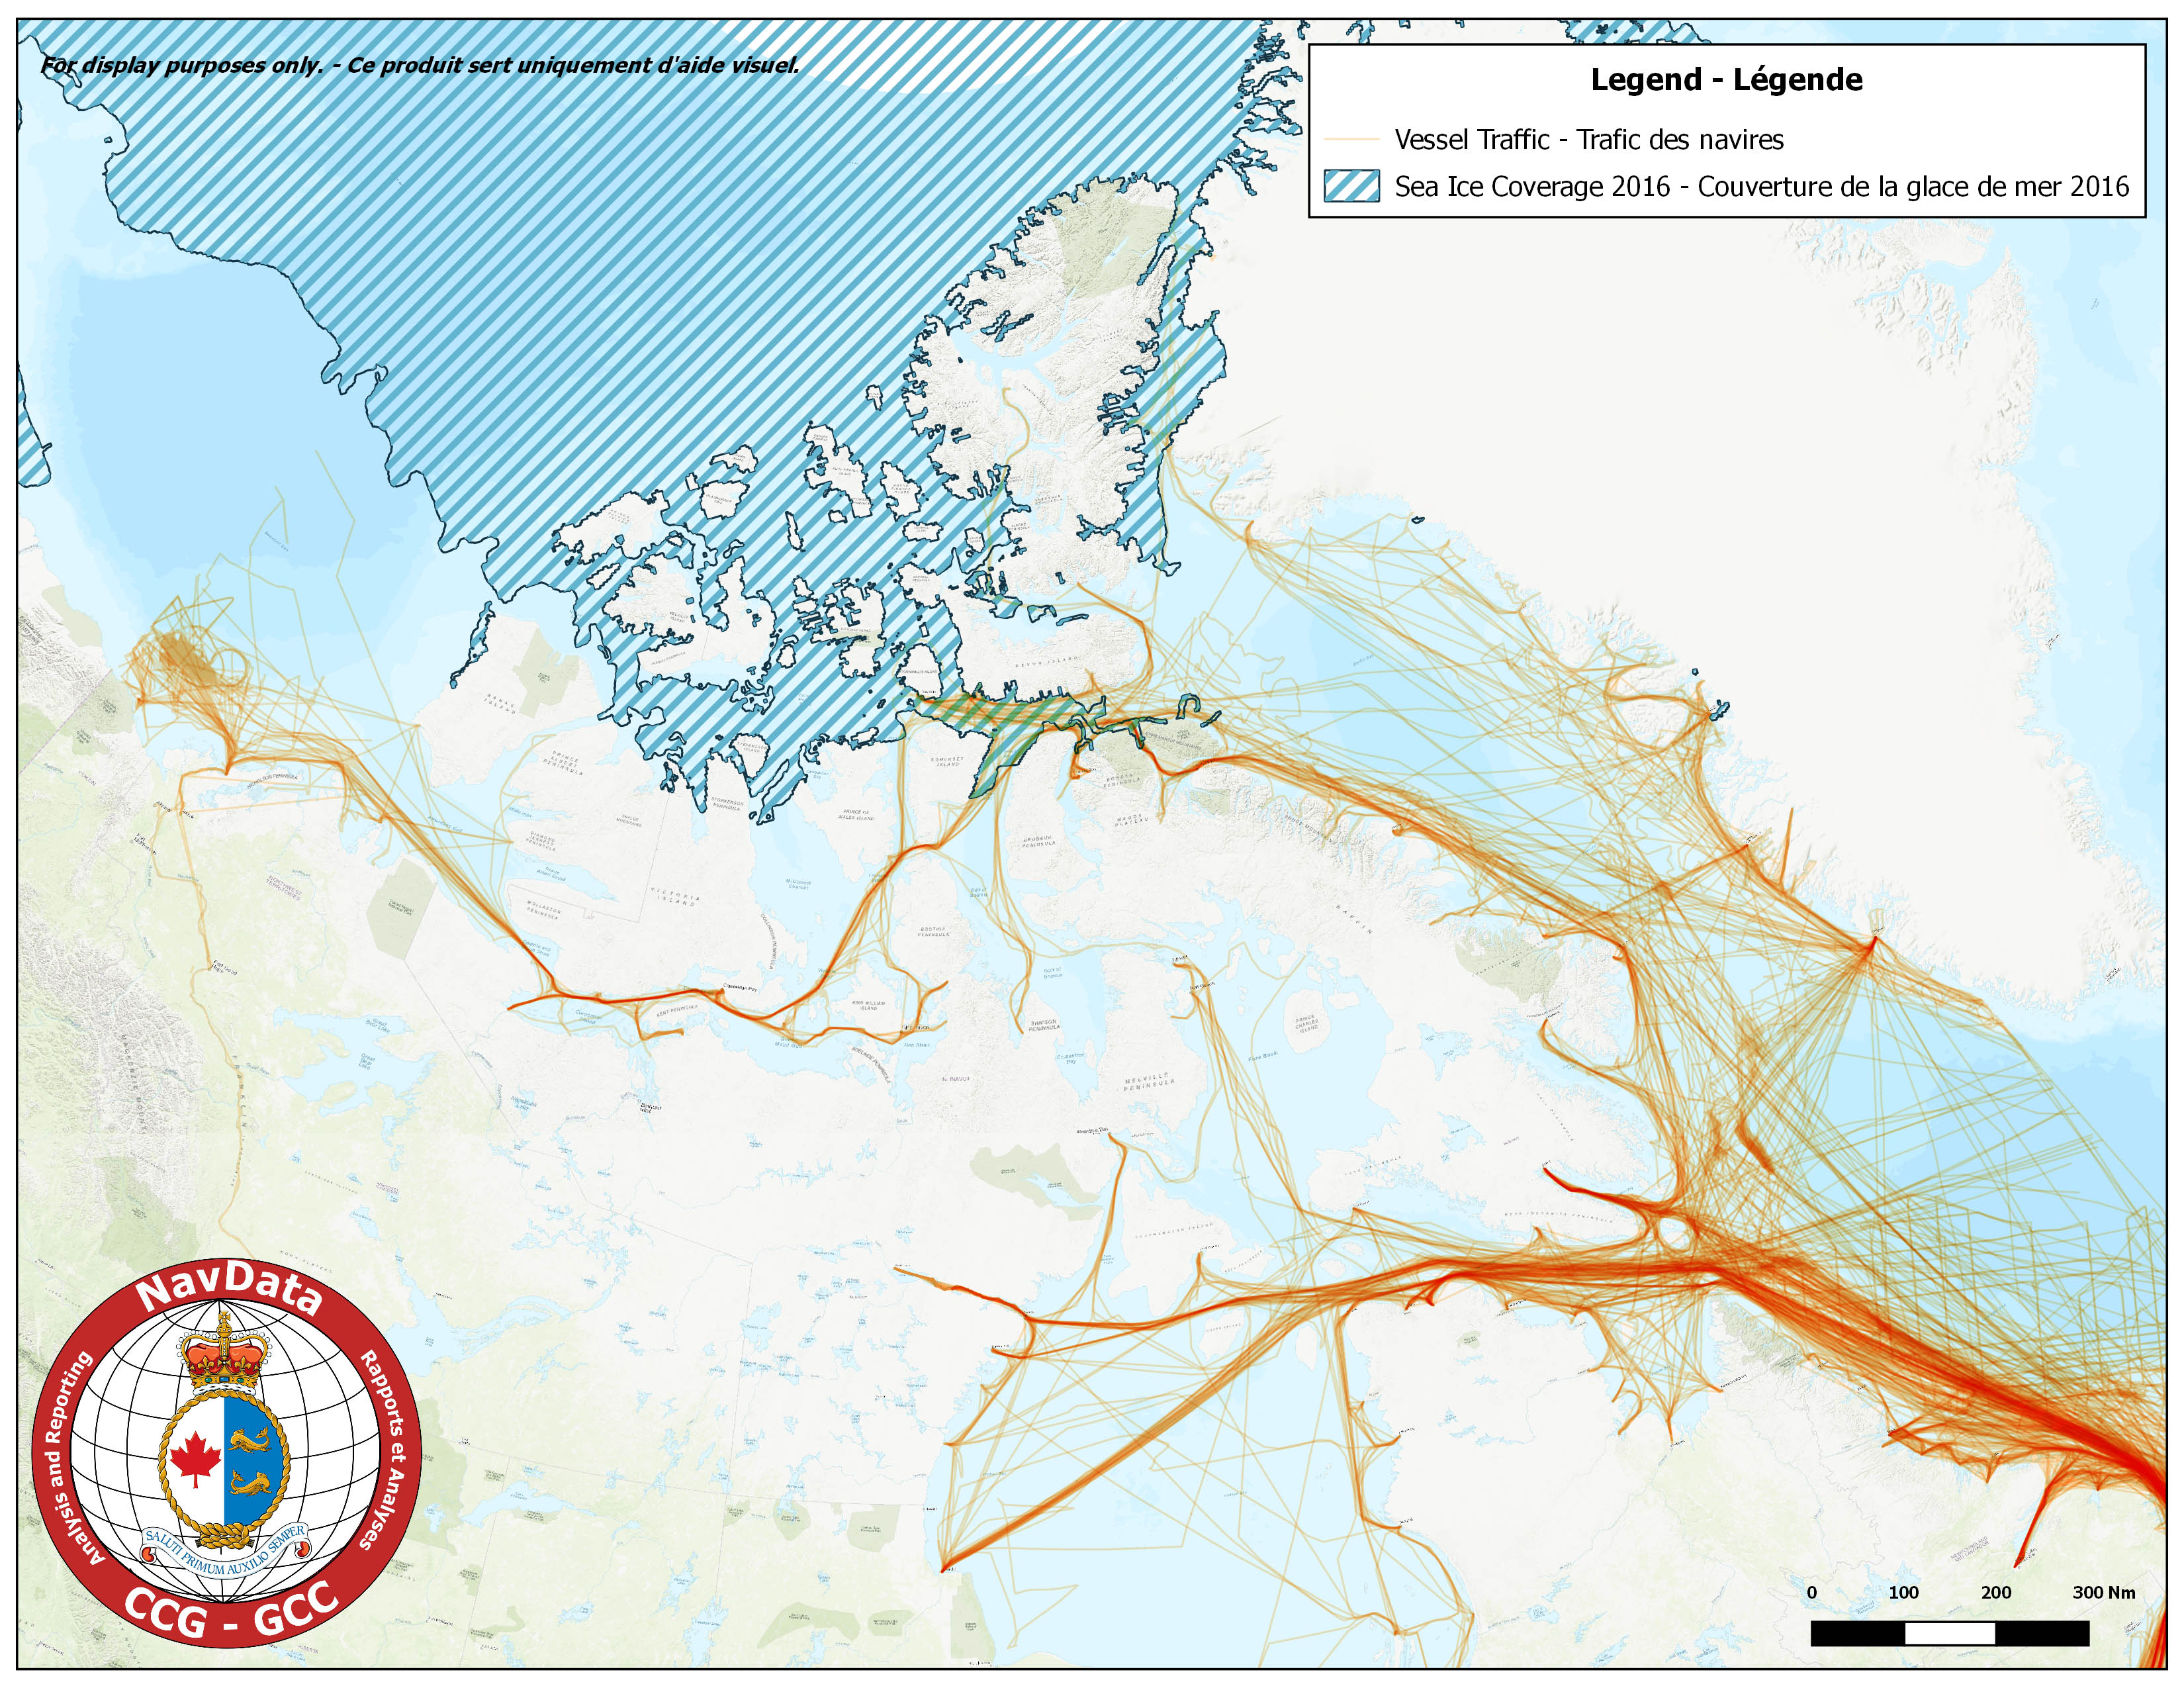 Map showing Arctic traffic density and maximum ice coverage for season of 2016